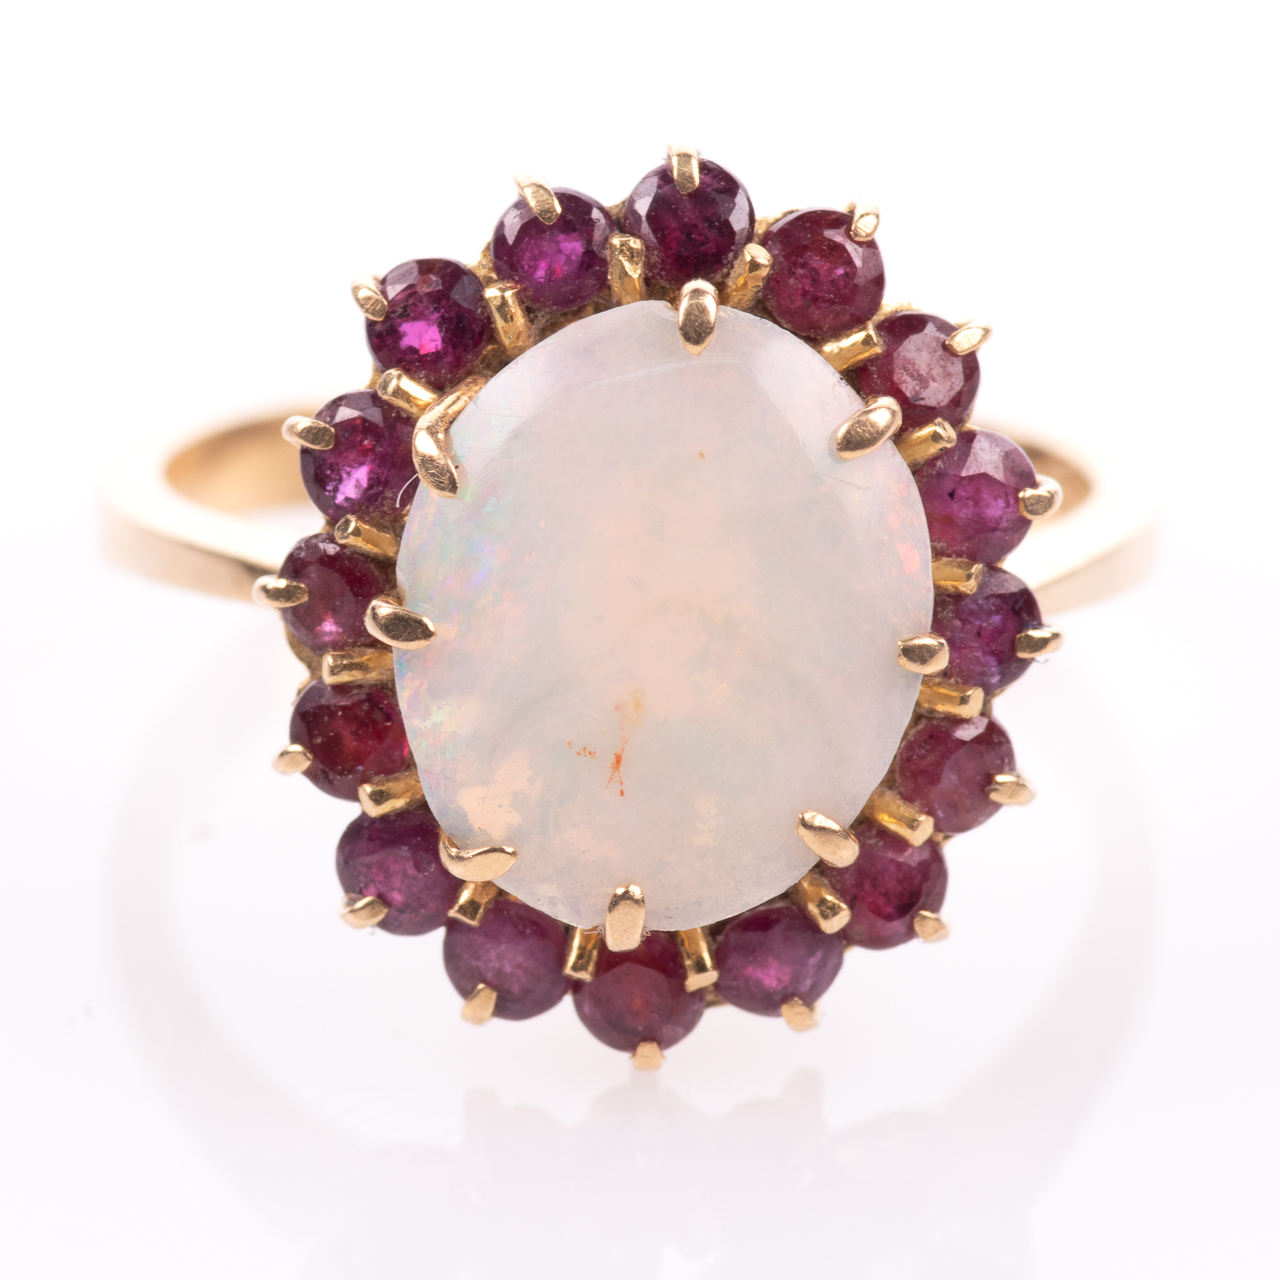 18ct Gold Solid 1.40ct Opal & 2.40ct Ruby Ring - Image 3 of 7